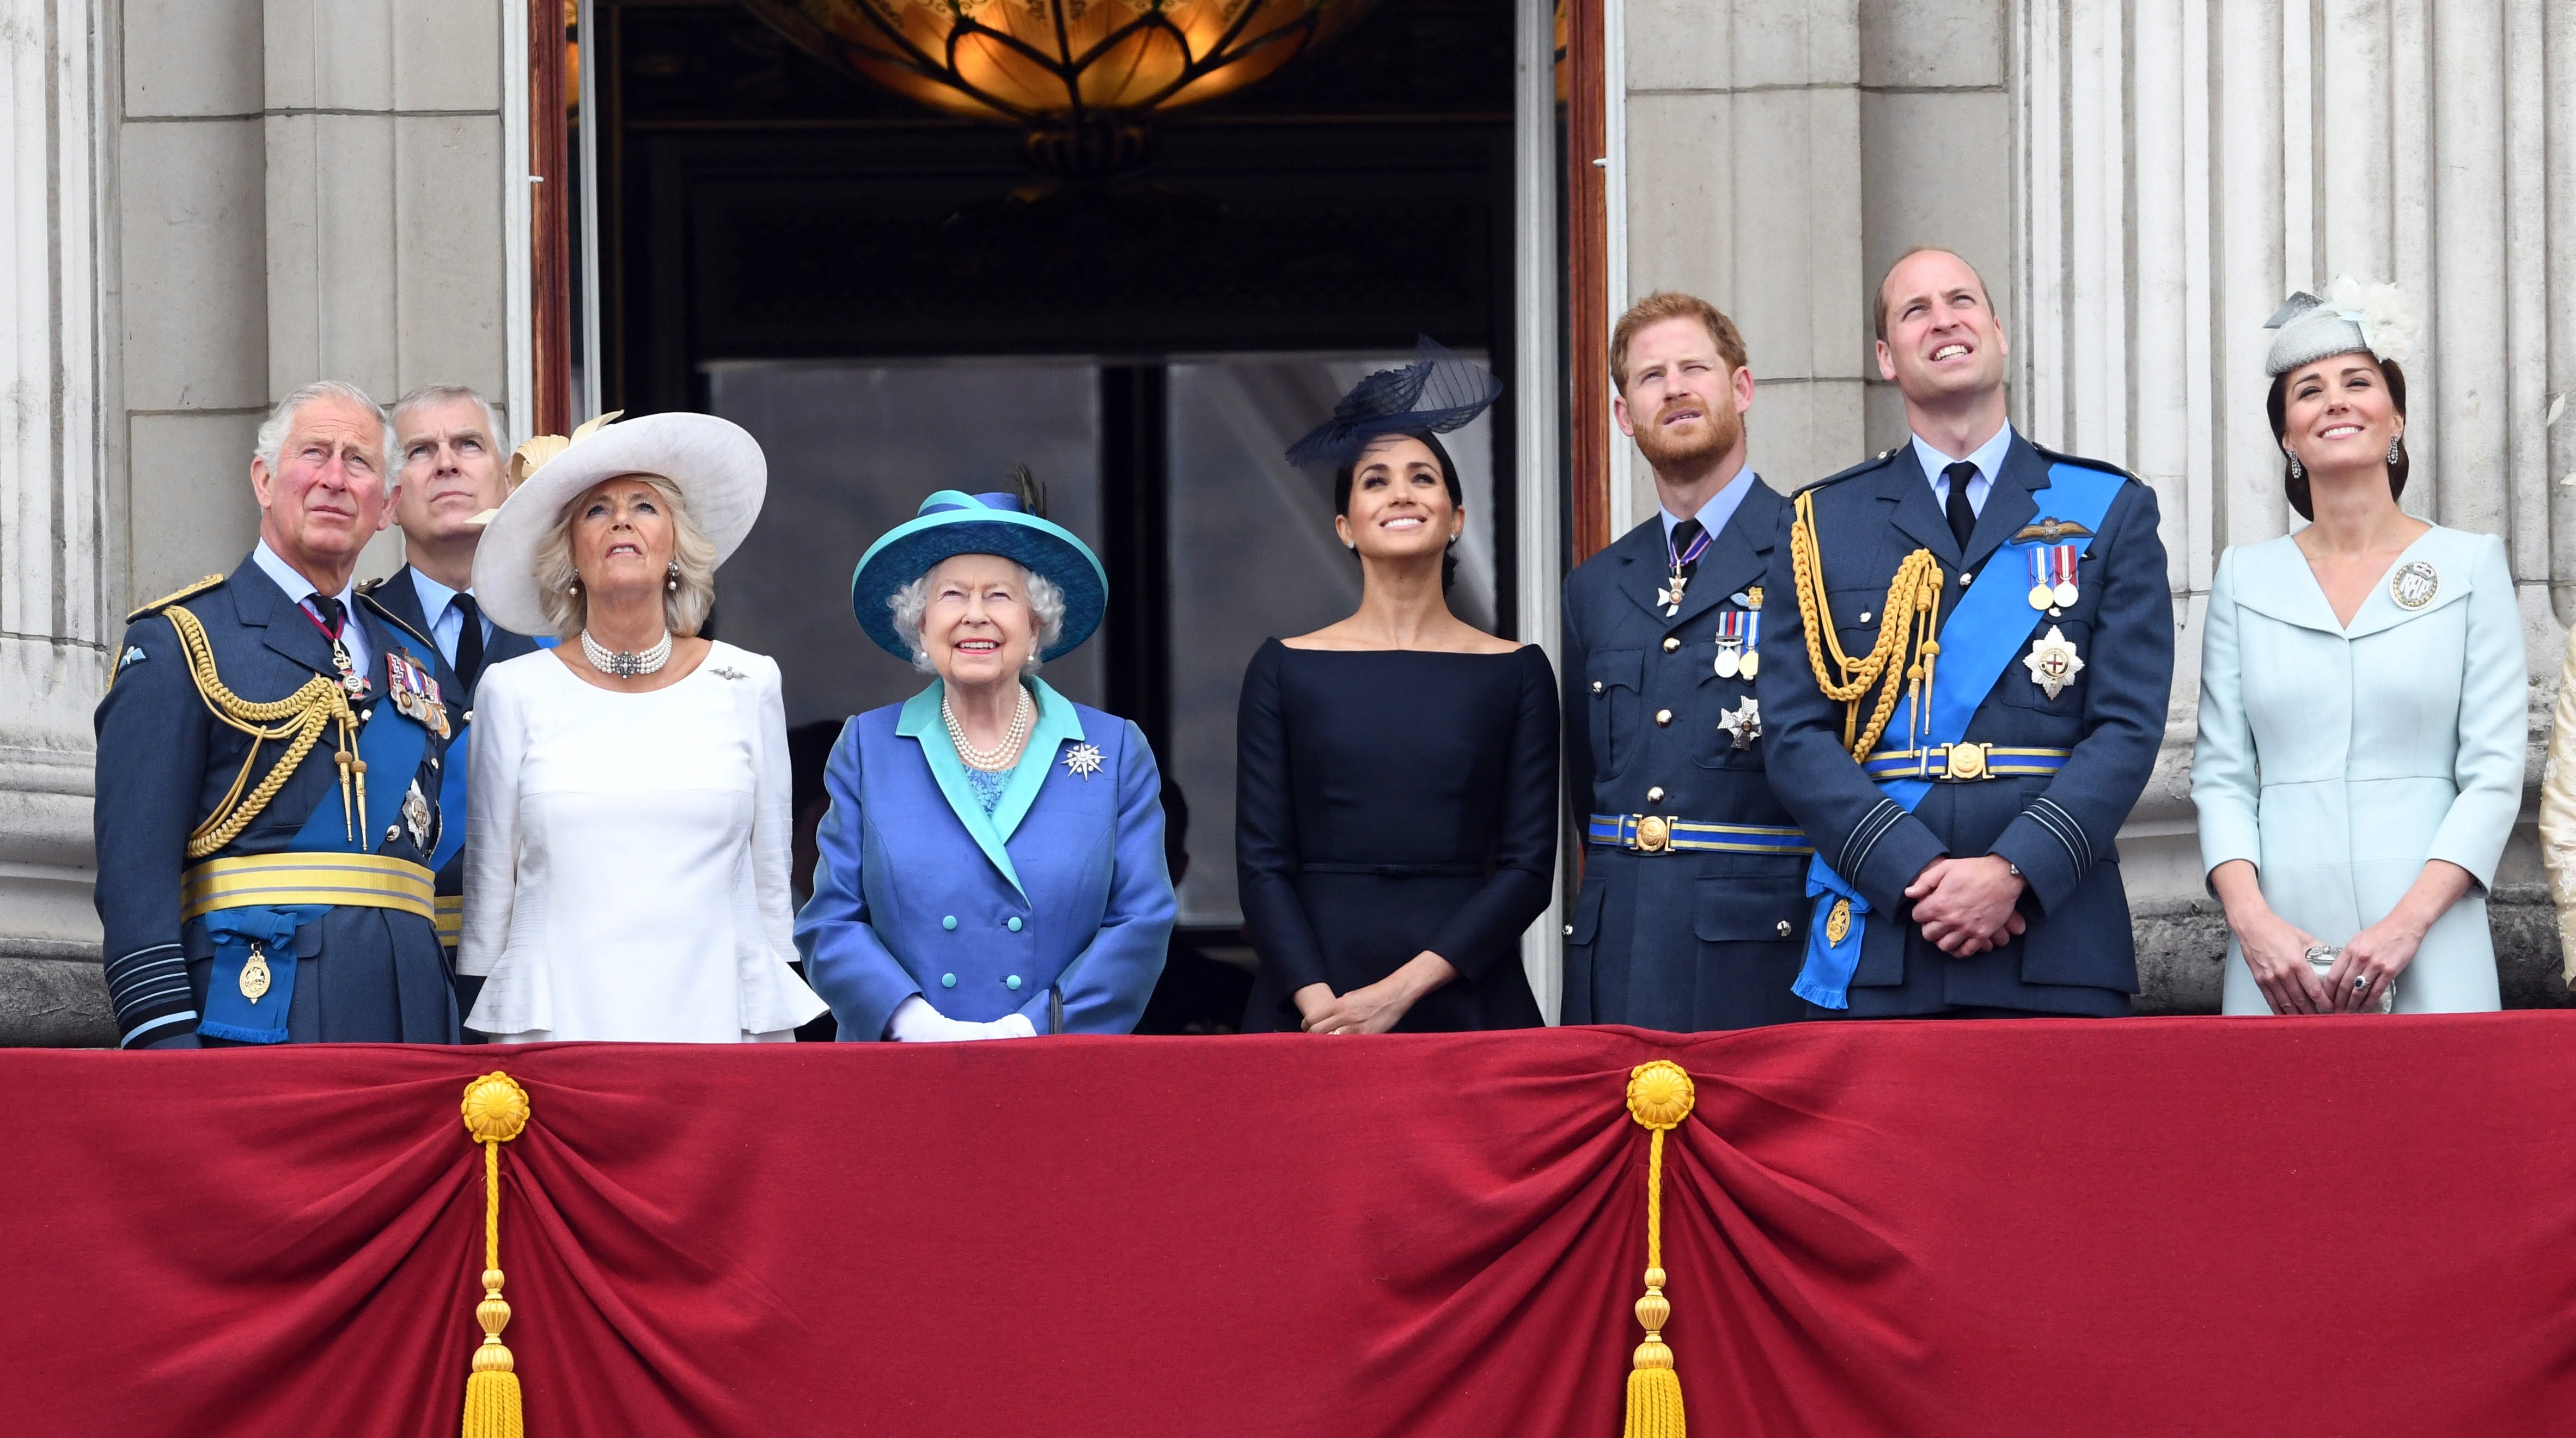 Britain's Charles, the Prince of Wales; Prince Andrew, Duke of York; Camilla, Duchess of Cornwall; Queen Elizabeth, Meghan, Duchess of Sussex; Prince Harry, the Duke of Sussex; Prince William, Duke of Cambridge and Catherine, Duchess of Cambridge on the balcony of Buckingham Palace. Photo: EPA-EFE